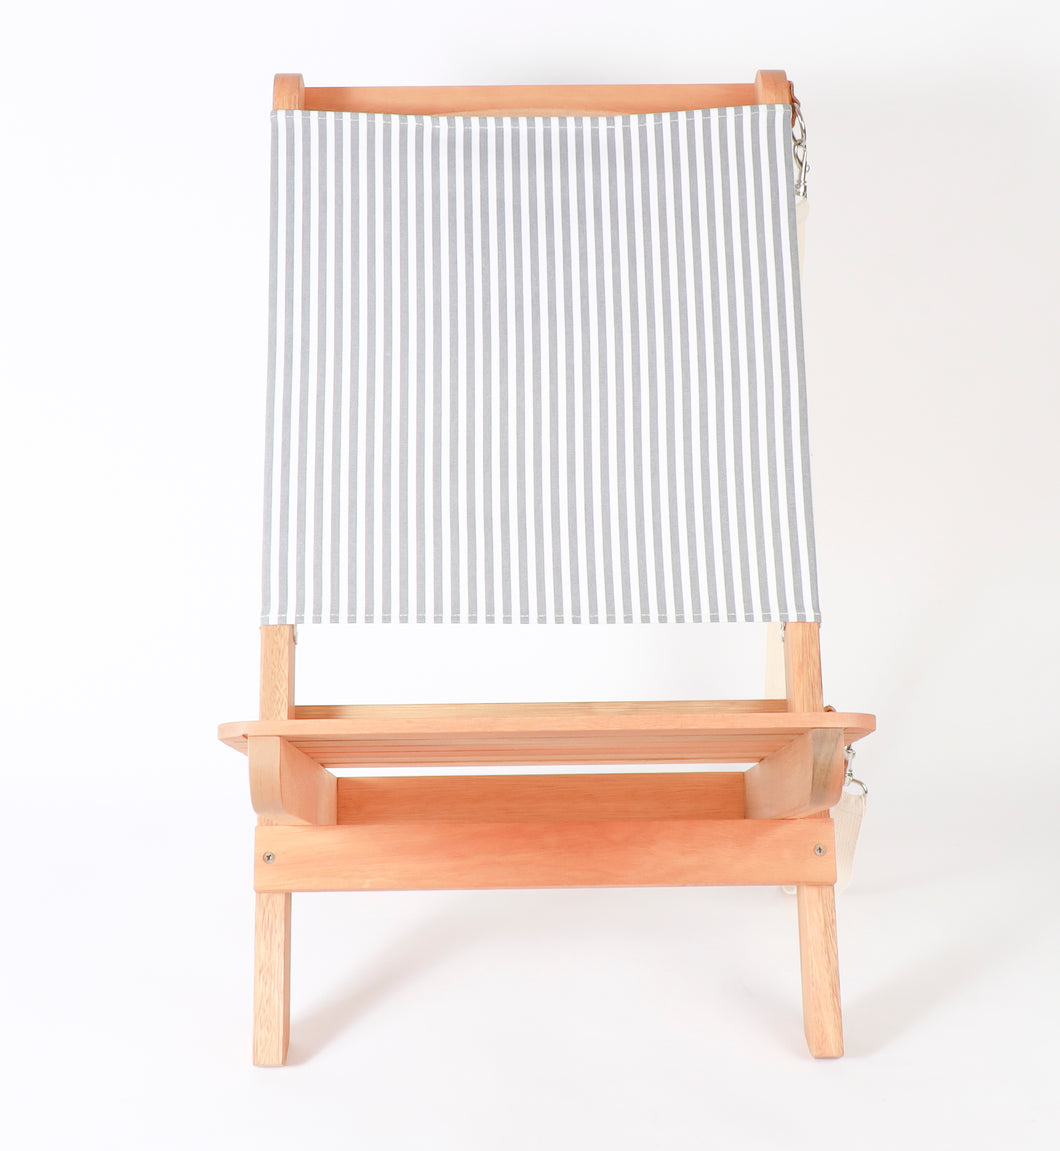 The Iconic Outdoor Chair